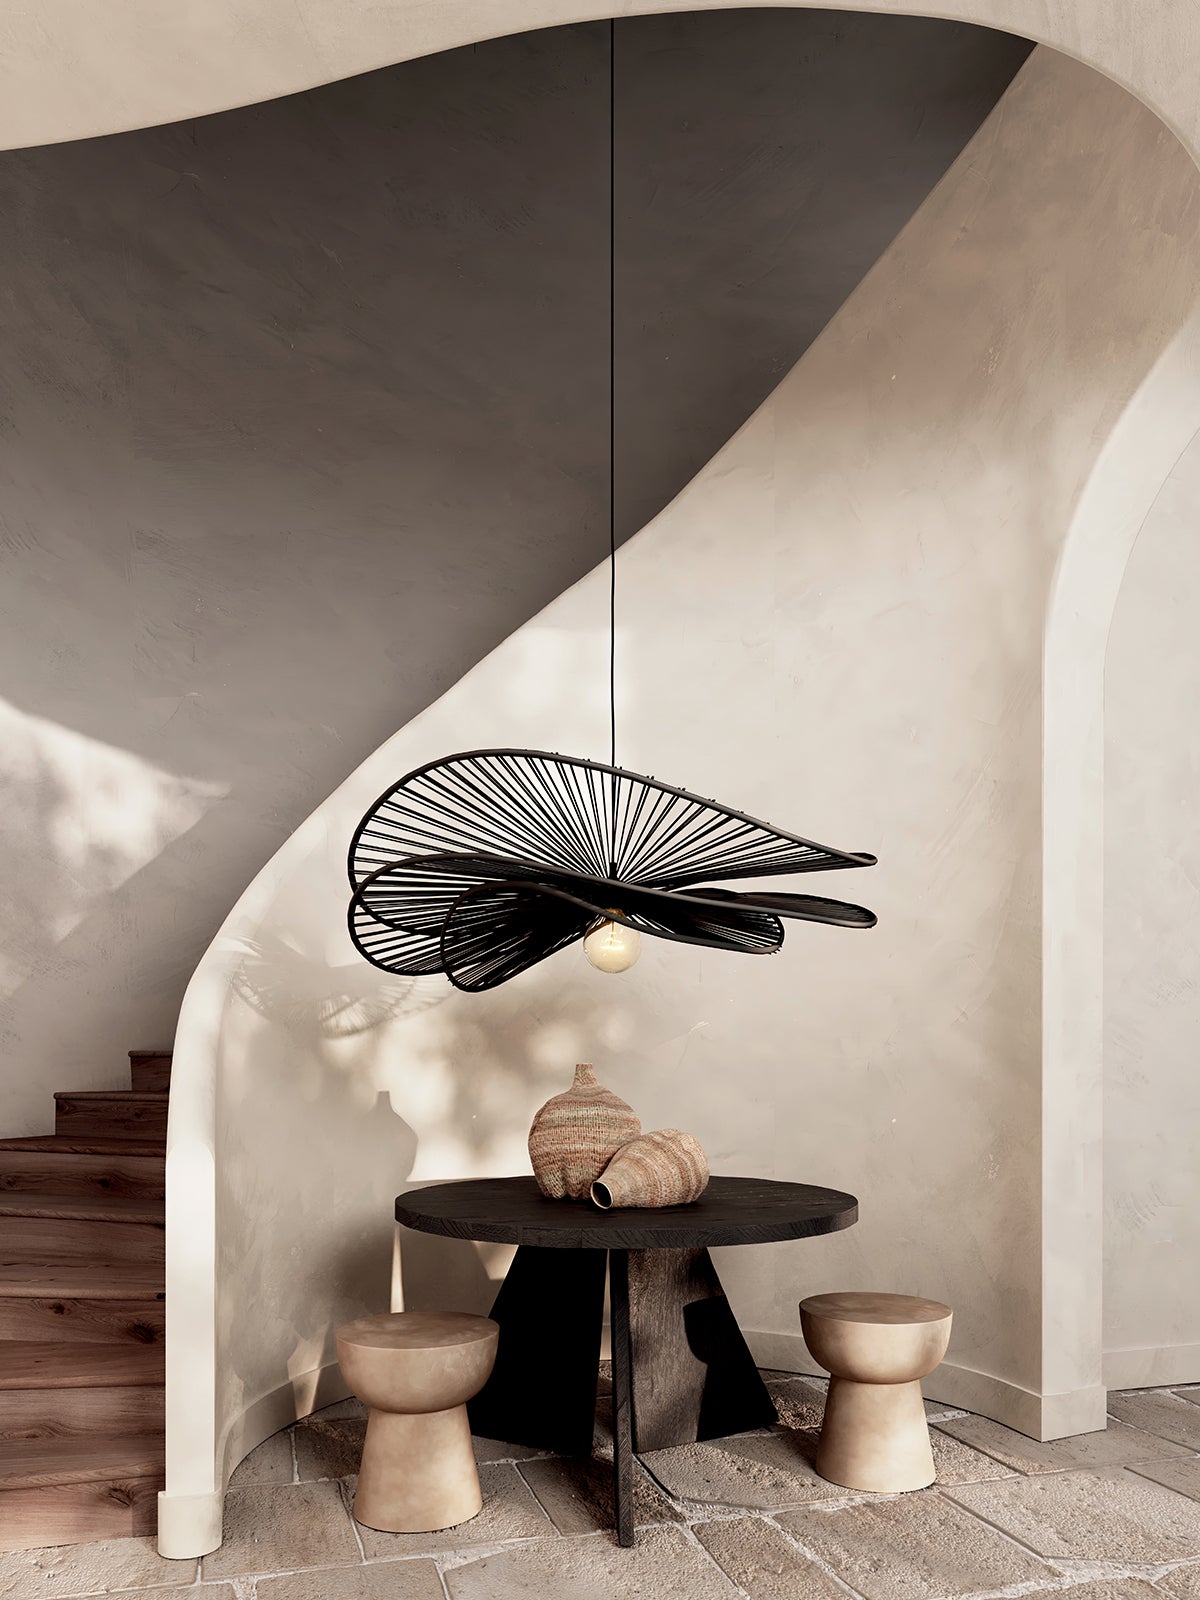 Black lamp suspended over table